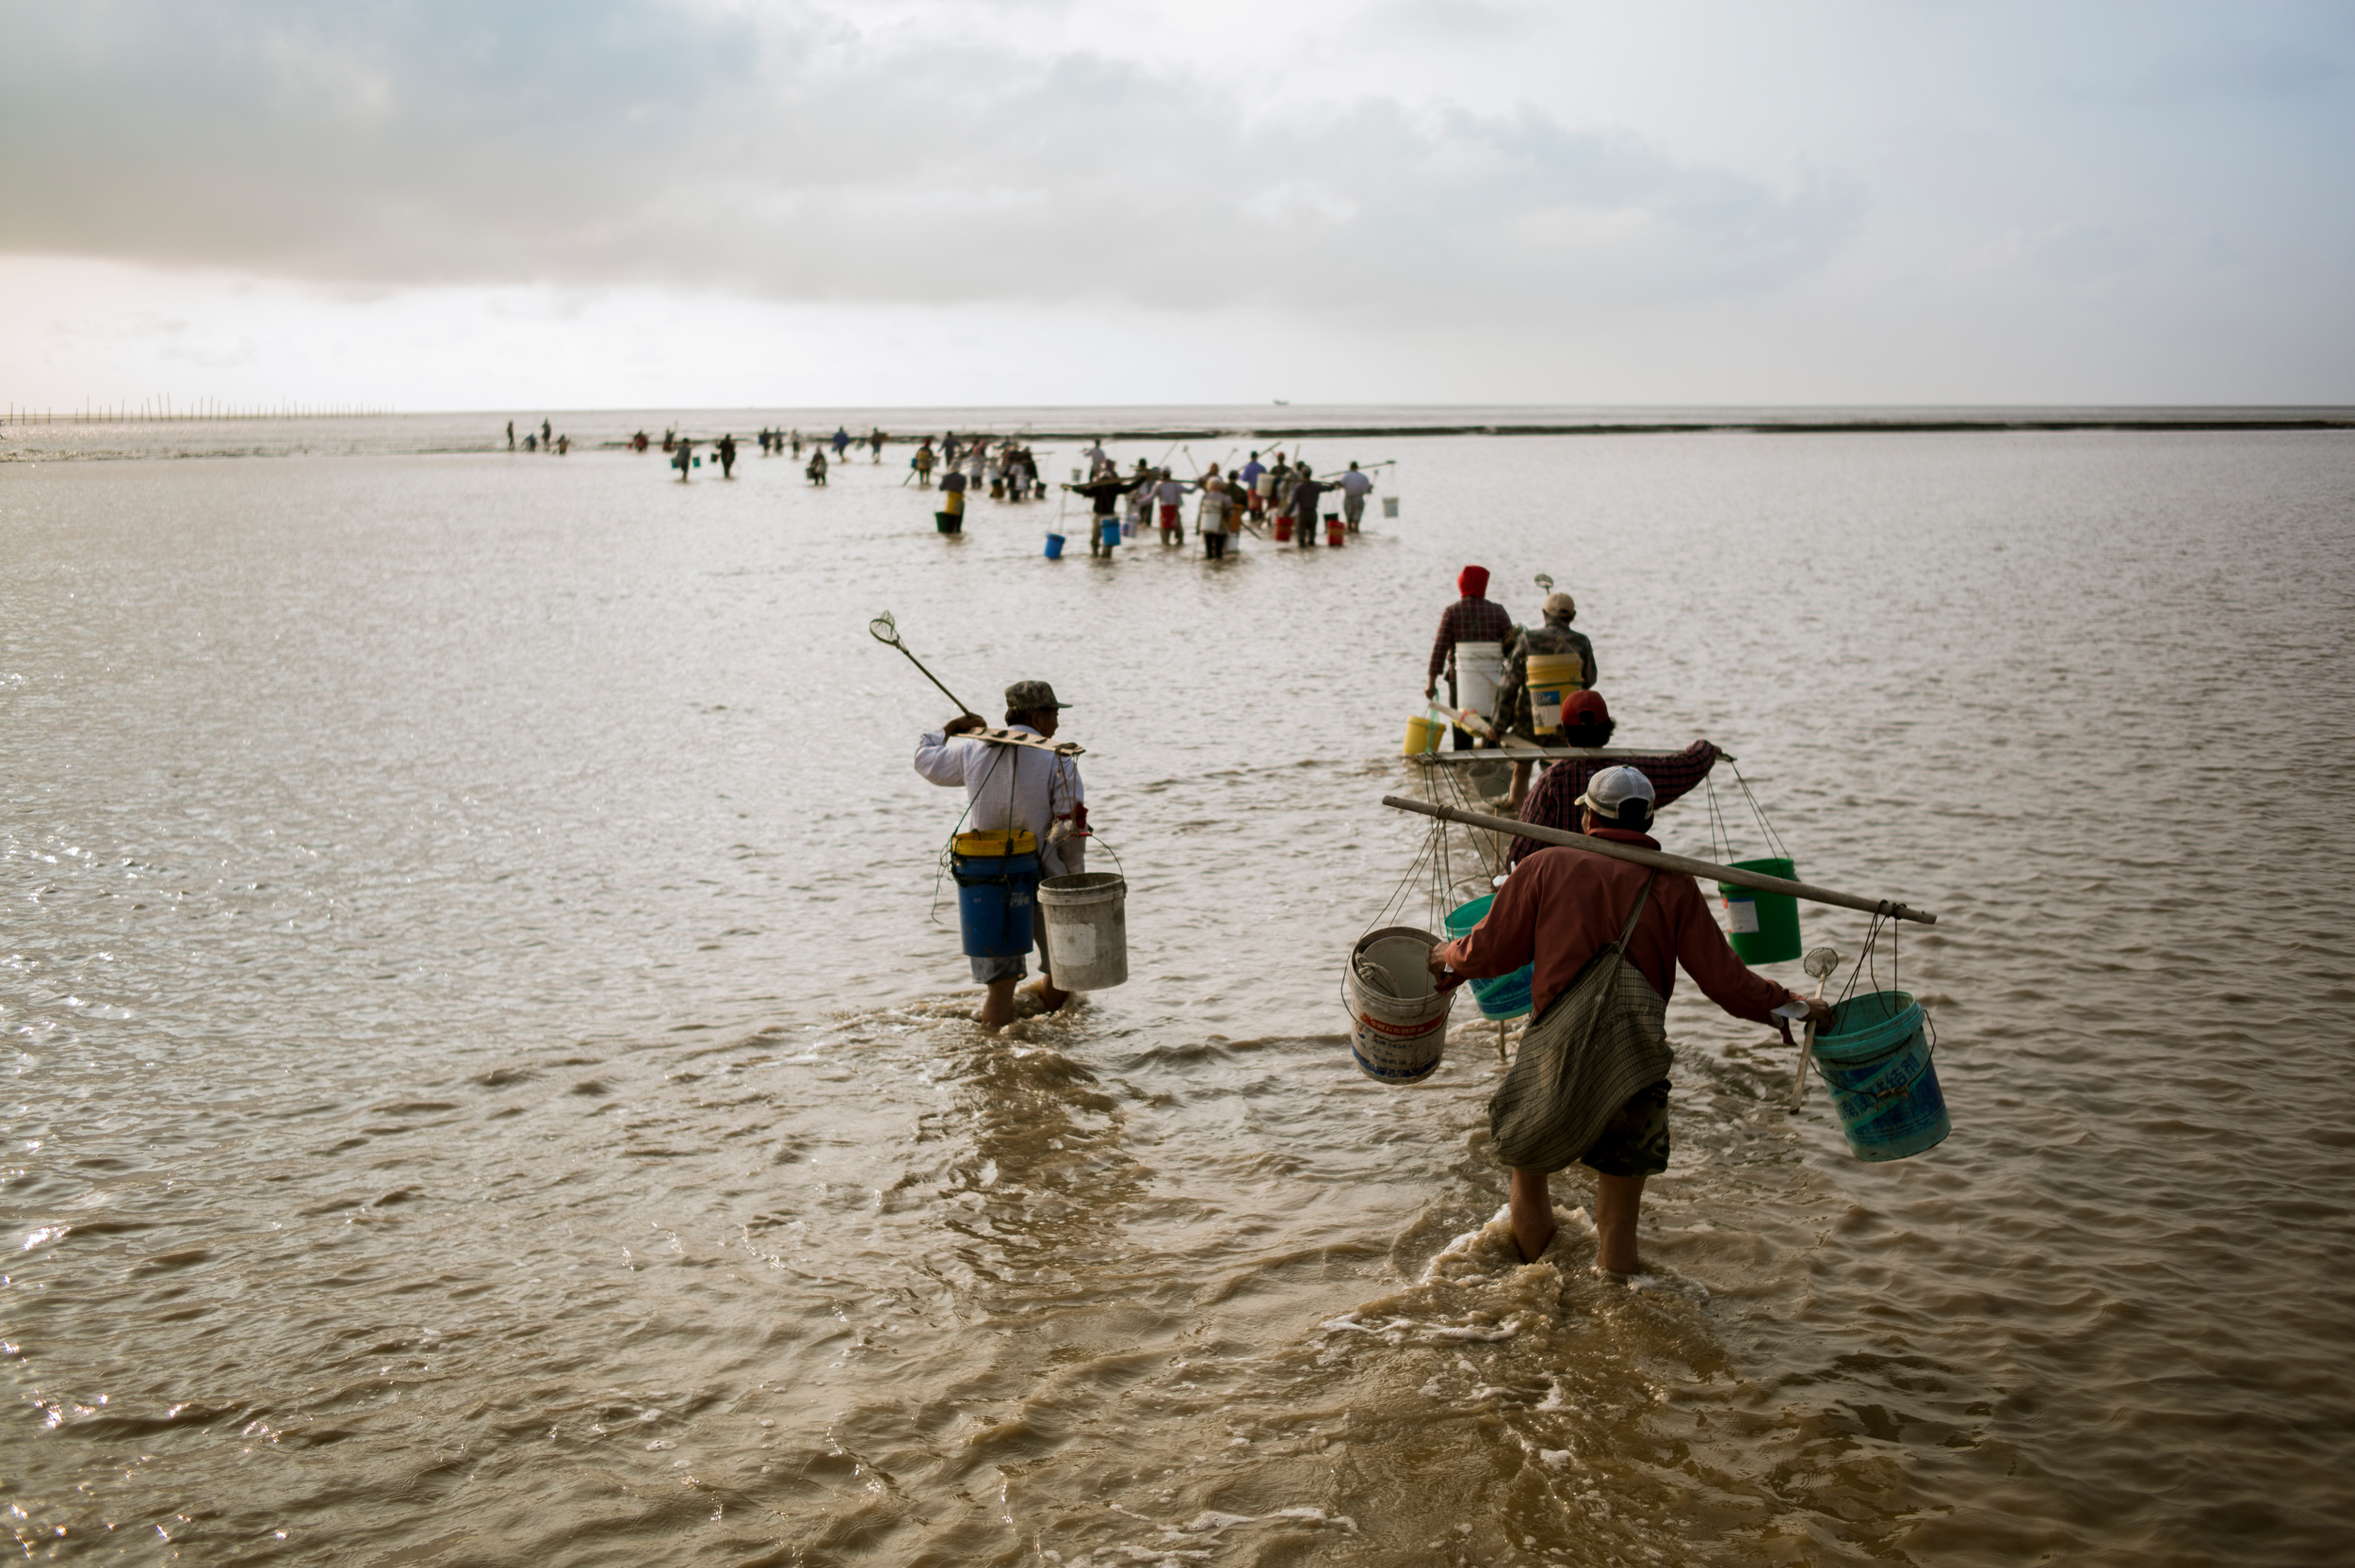 A loose group of people carrying spades and large buckets strapped across their shoulders. They fade into the horizon as they walk through muddied water.